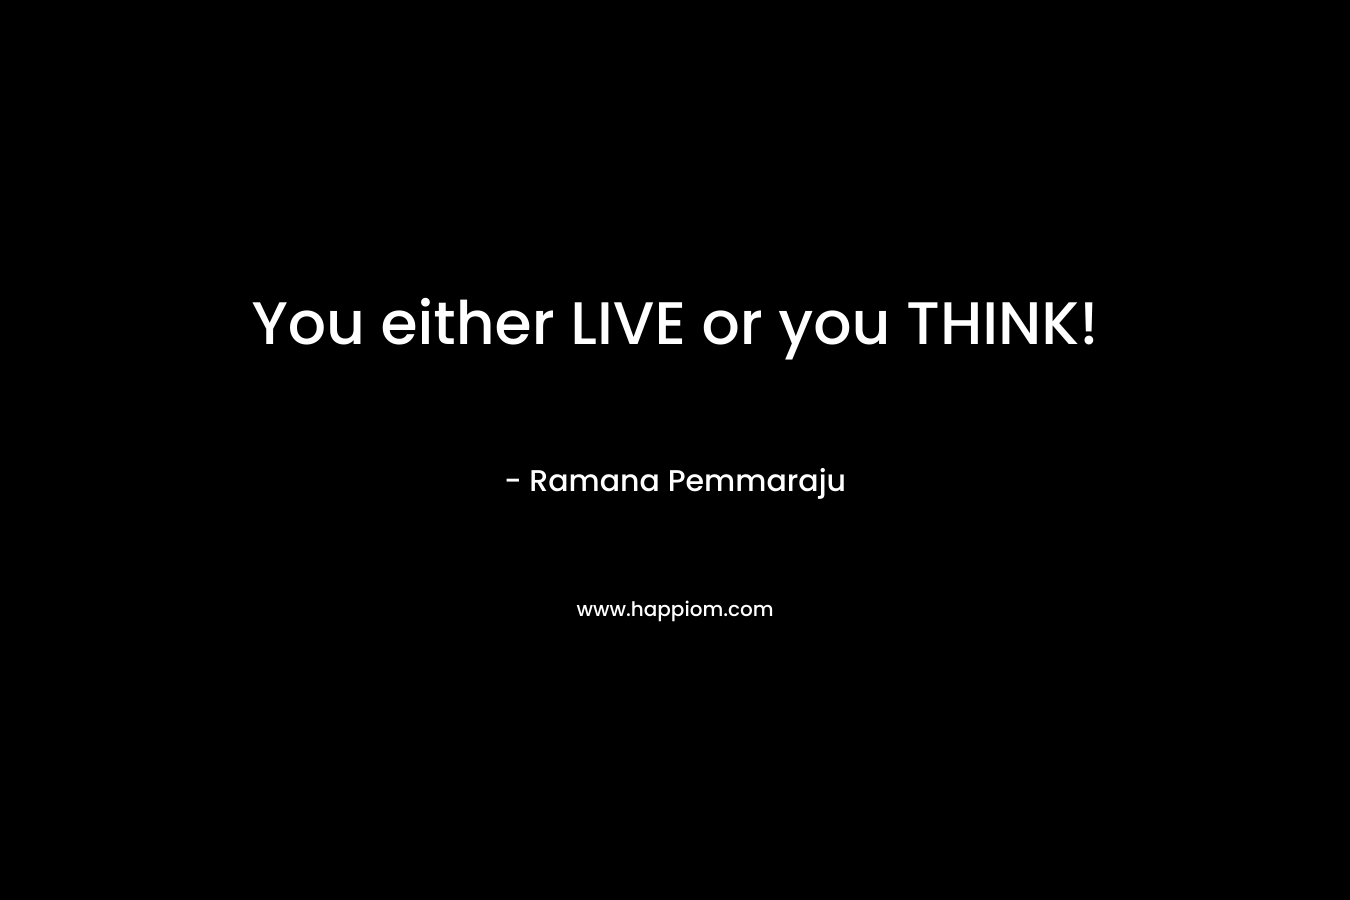 You either LIVE or you THINK!